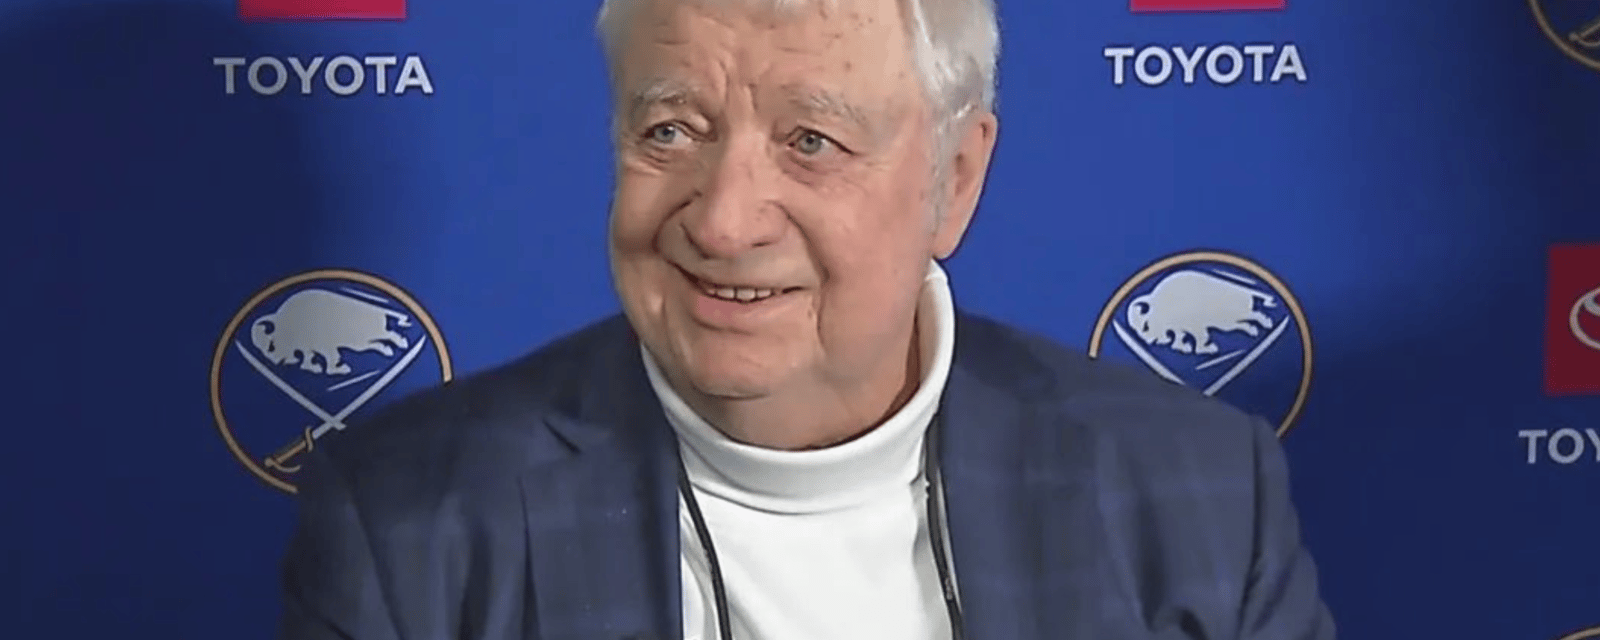 NHL Tributes begin pouring in for Rick Jeanneret